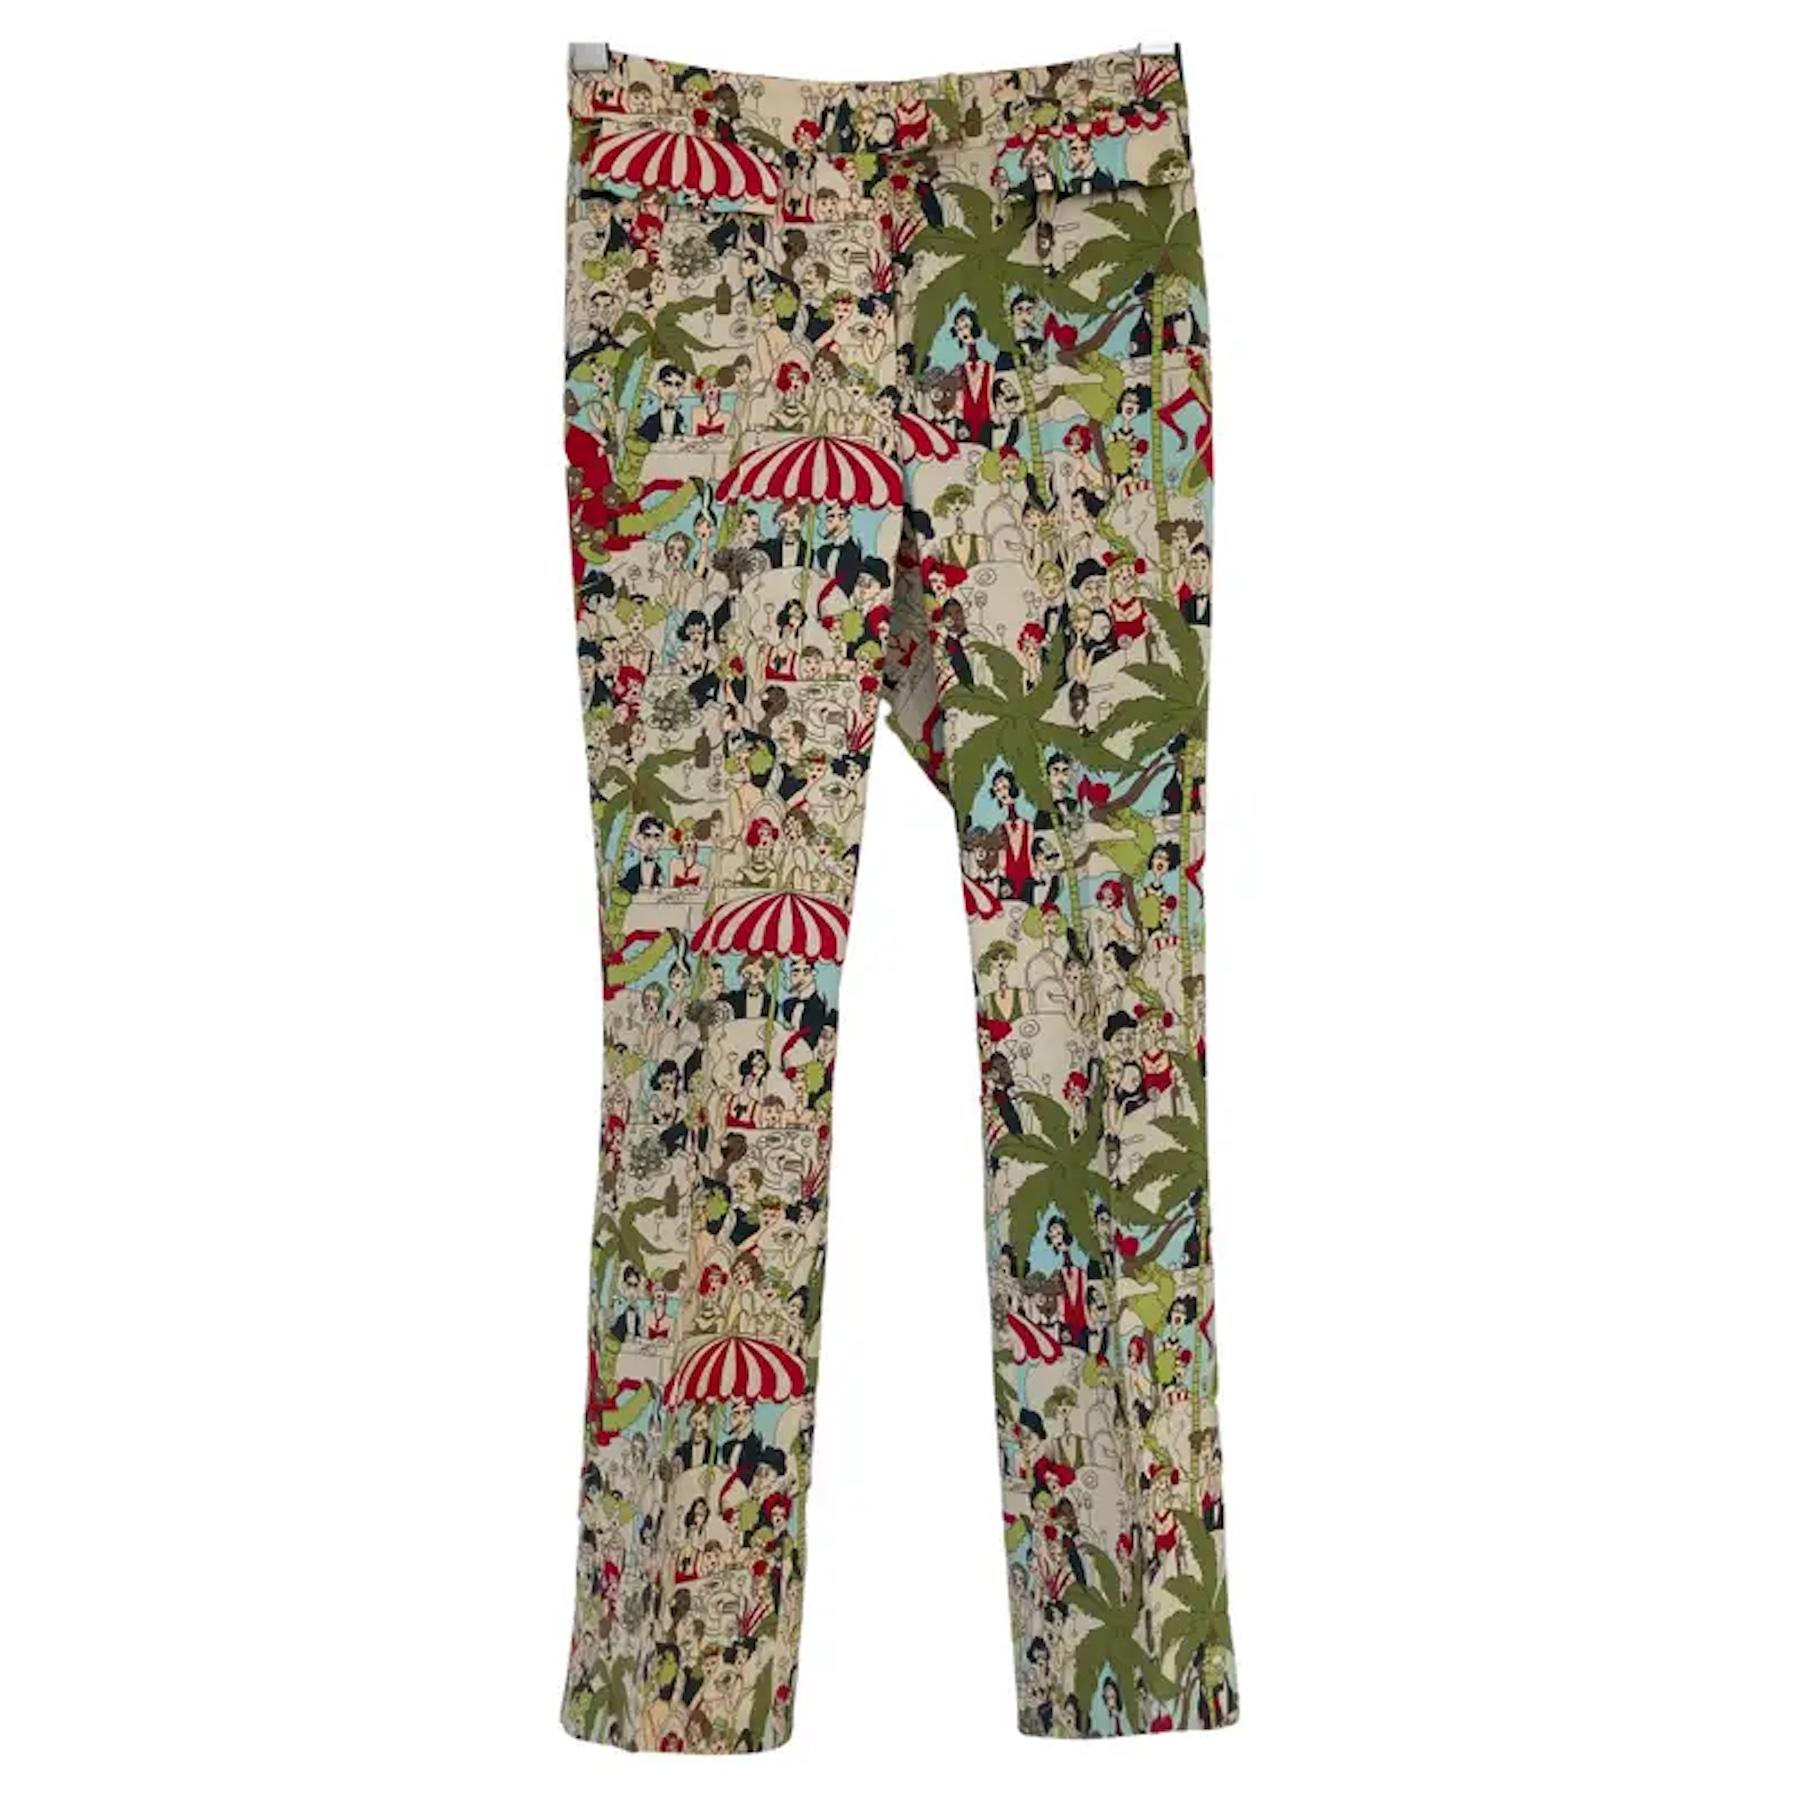 John Galliano Cafe Society print pants, flared leg trousers late 90s.
Vintage John Galliano silk like pants with all over a Cafe Society inspired illustrated print.
Vintage John Galliano graphic printed pants. Iconic Cafe Society print meets